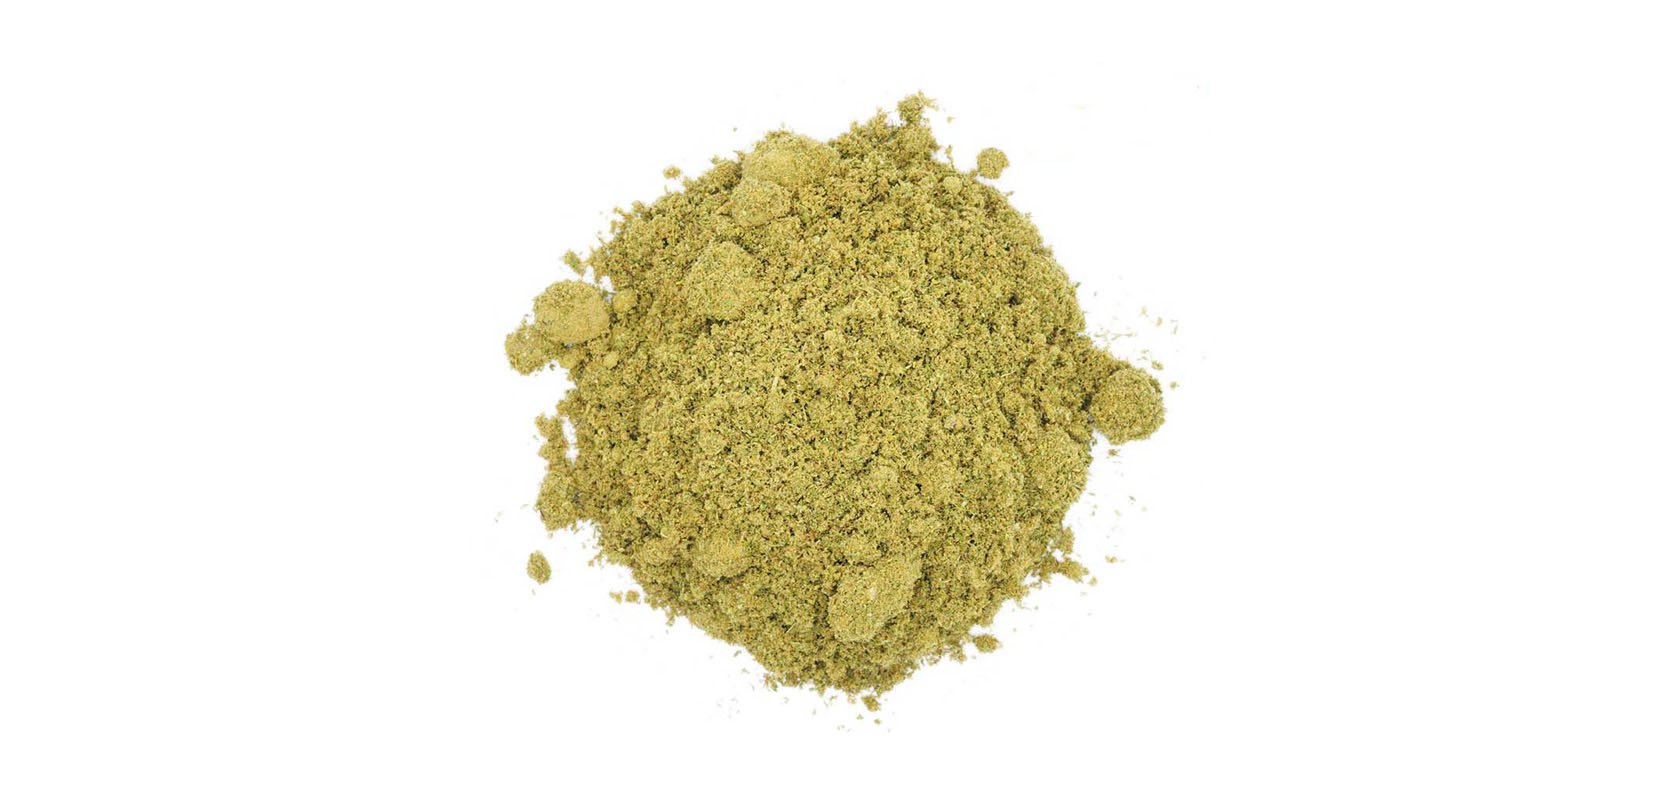 Kief Gorilla Glue #4 weed concentrate for sale online in Canada. Weed dispensary for cannabis concentrates in Canada. Buy weed online.